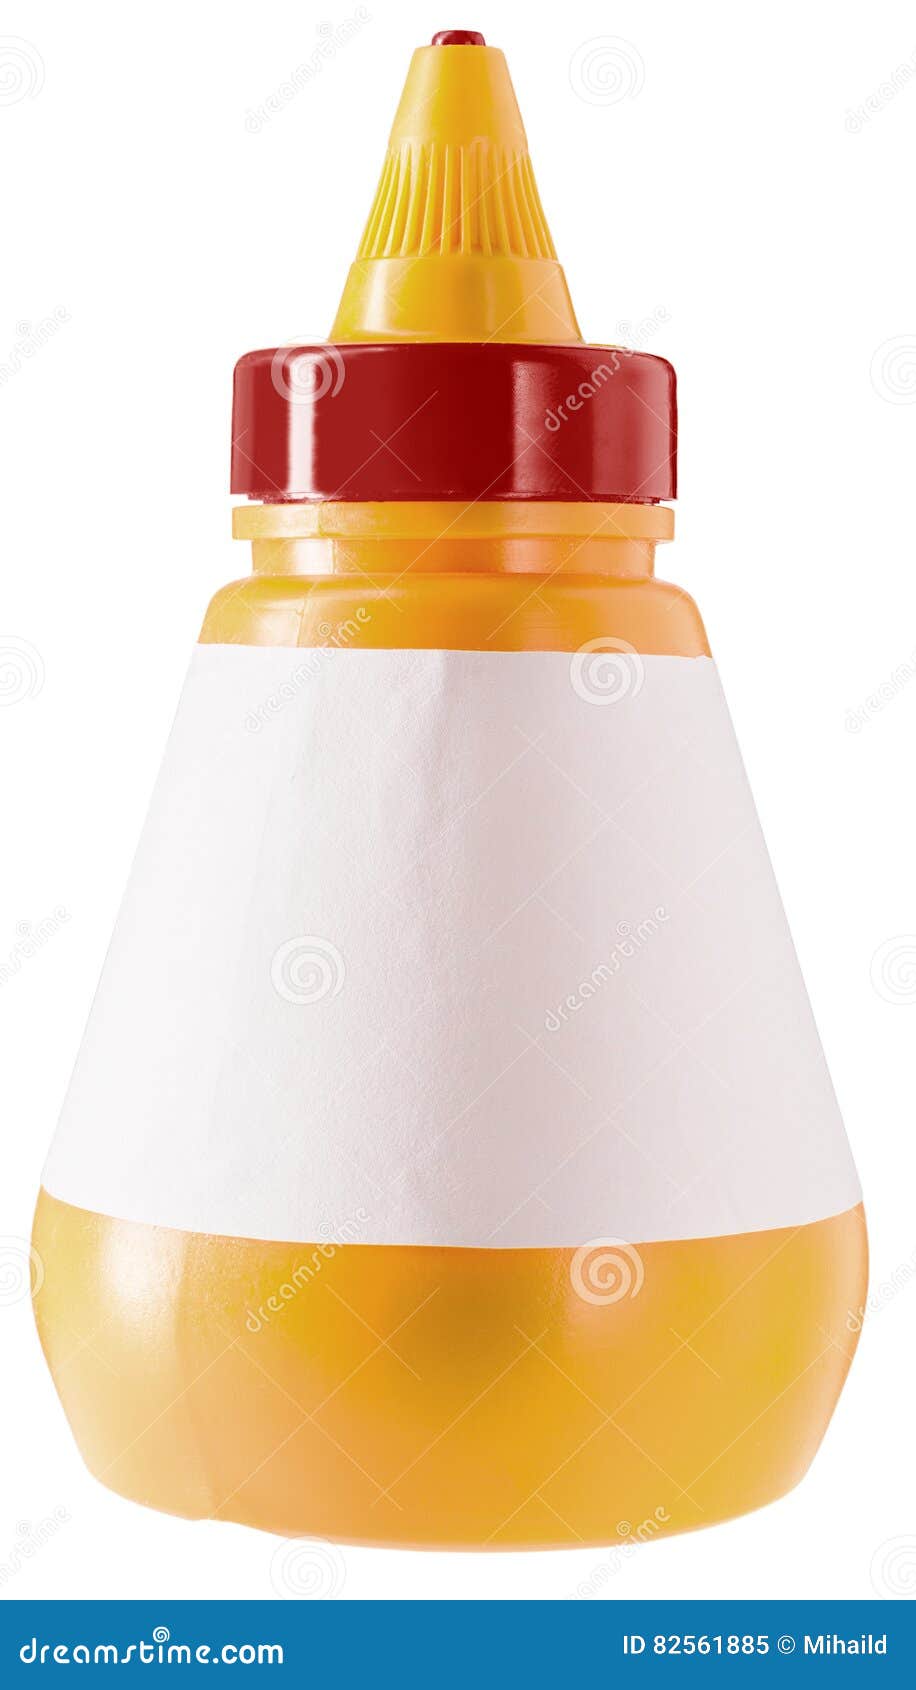 Download Yellow Bottle Of Glue With Blank Label Stock Image Image Of Object Equipment 82561885 Yellowimages Mockups